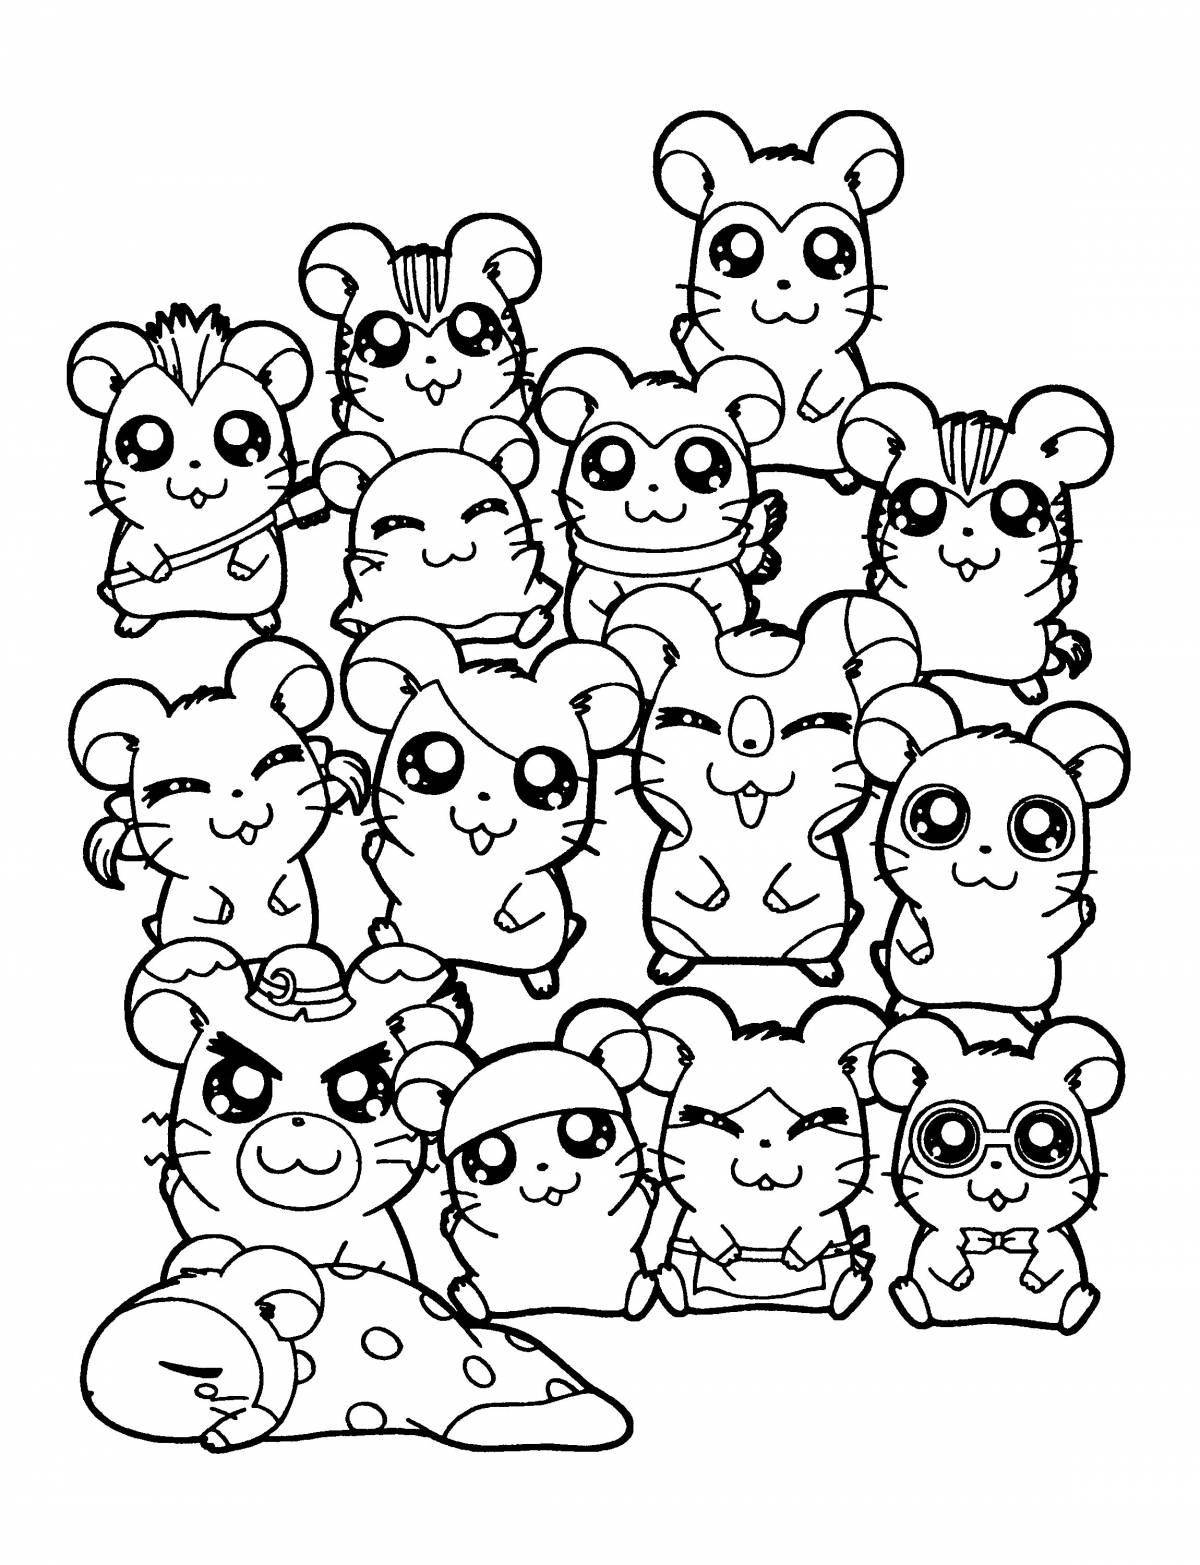 Fancy coloring small animals